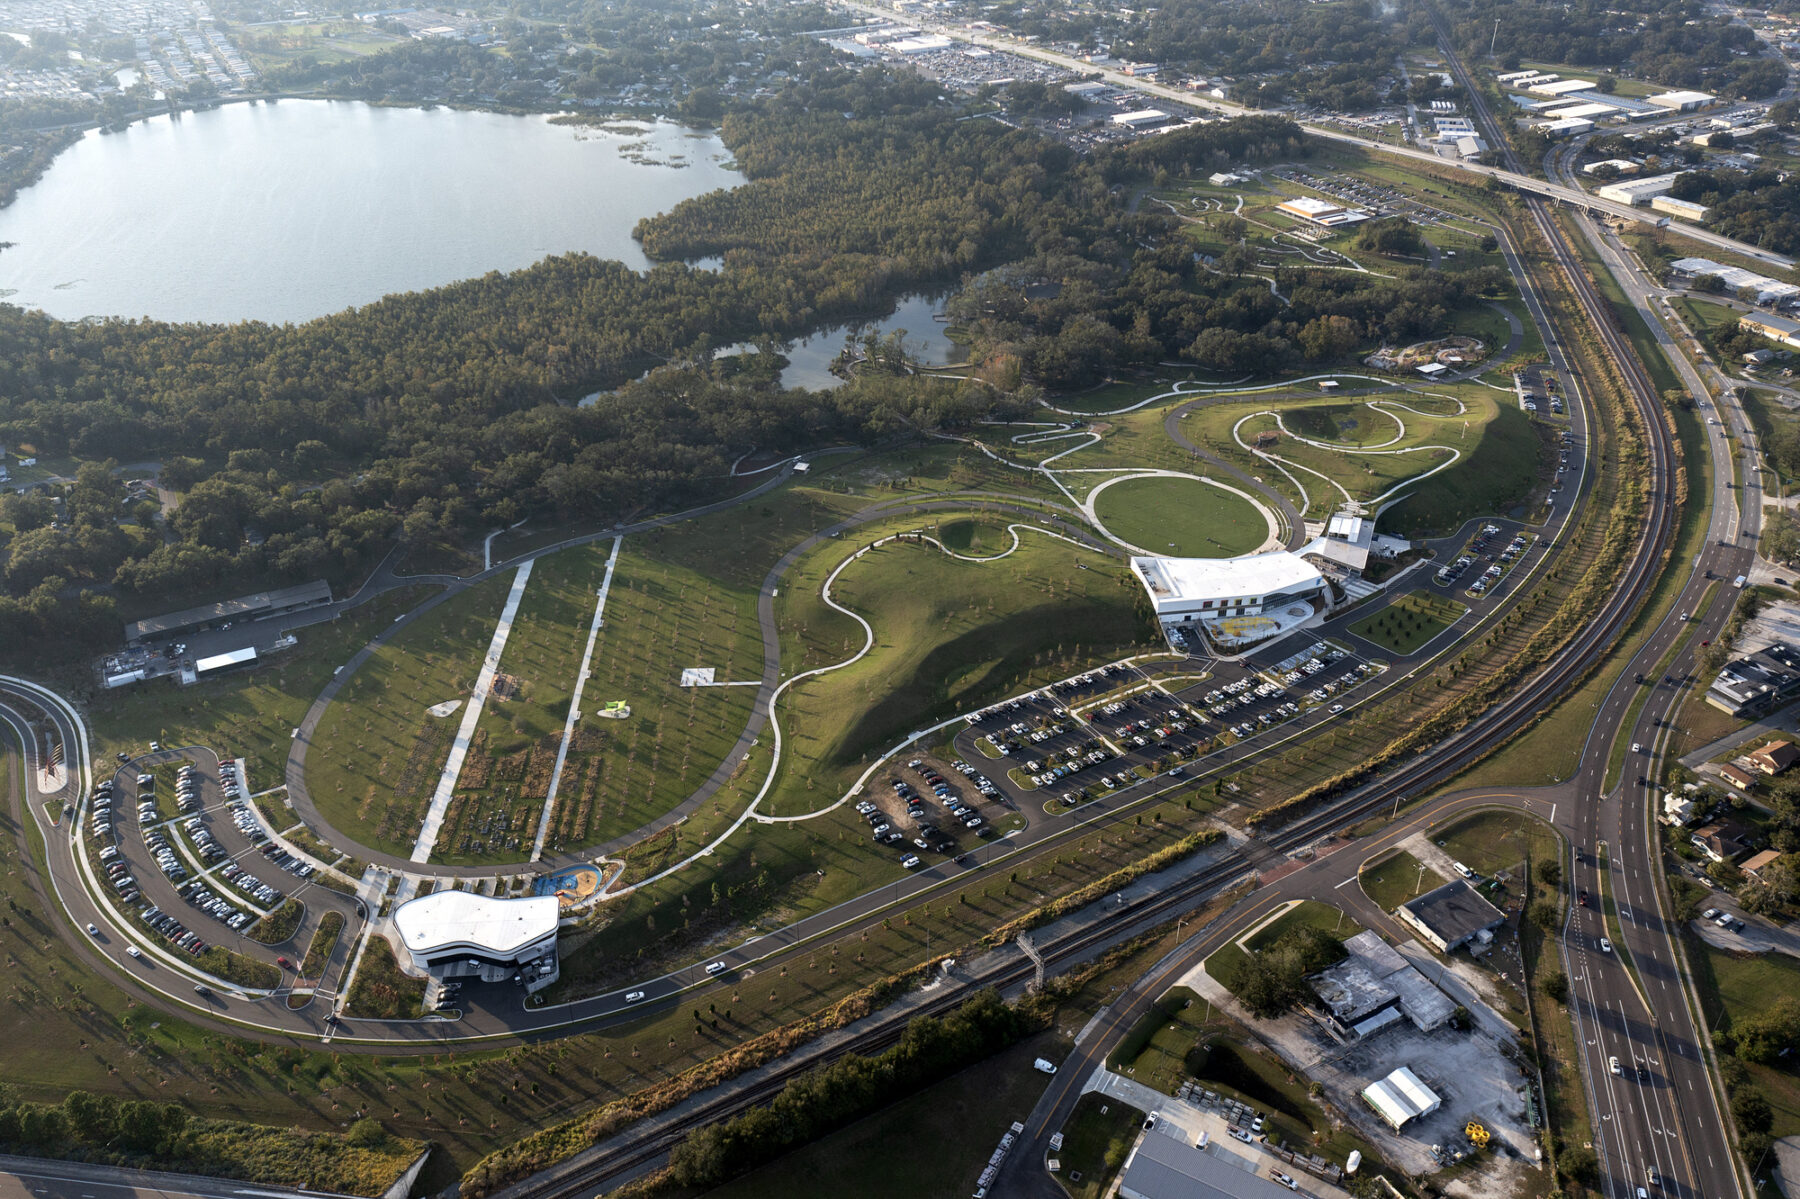 aerial photograph of welcome center shown in relation to main park circulator and nearby florida childrens museum